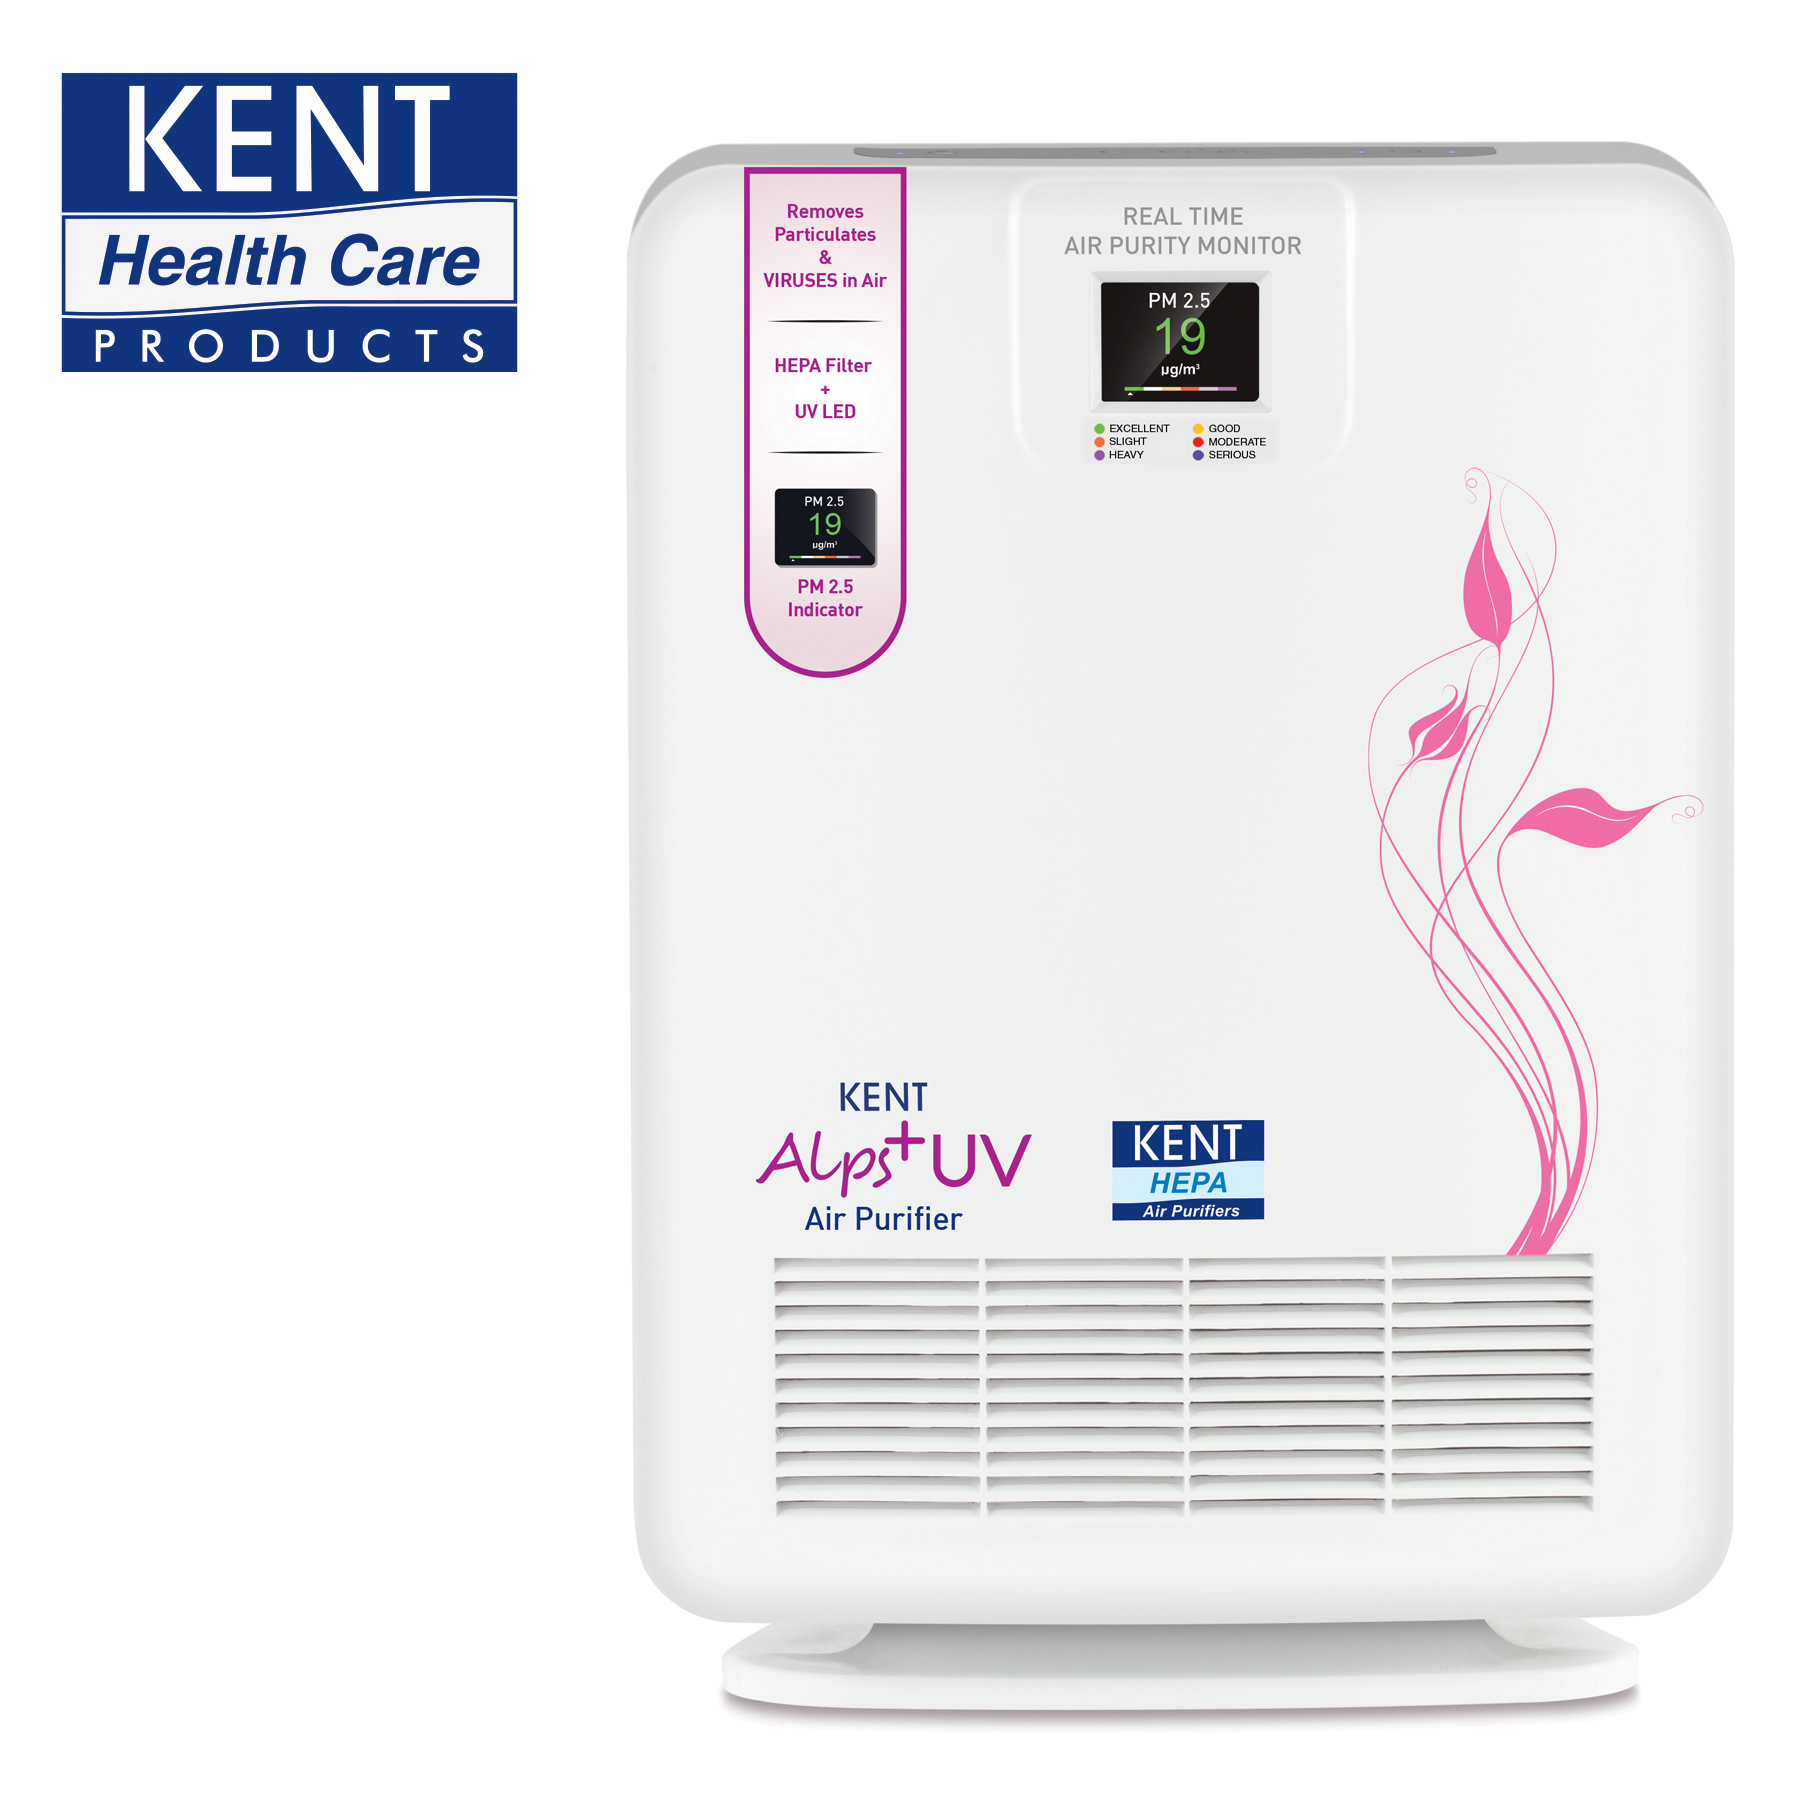 Protect Your Family from Indoor Air Pollution -  With KENT Alps+ UV Air Purifier